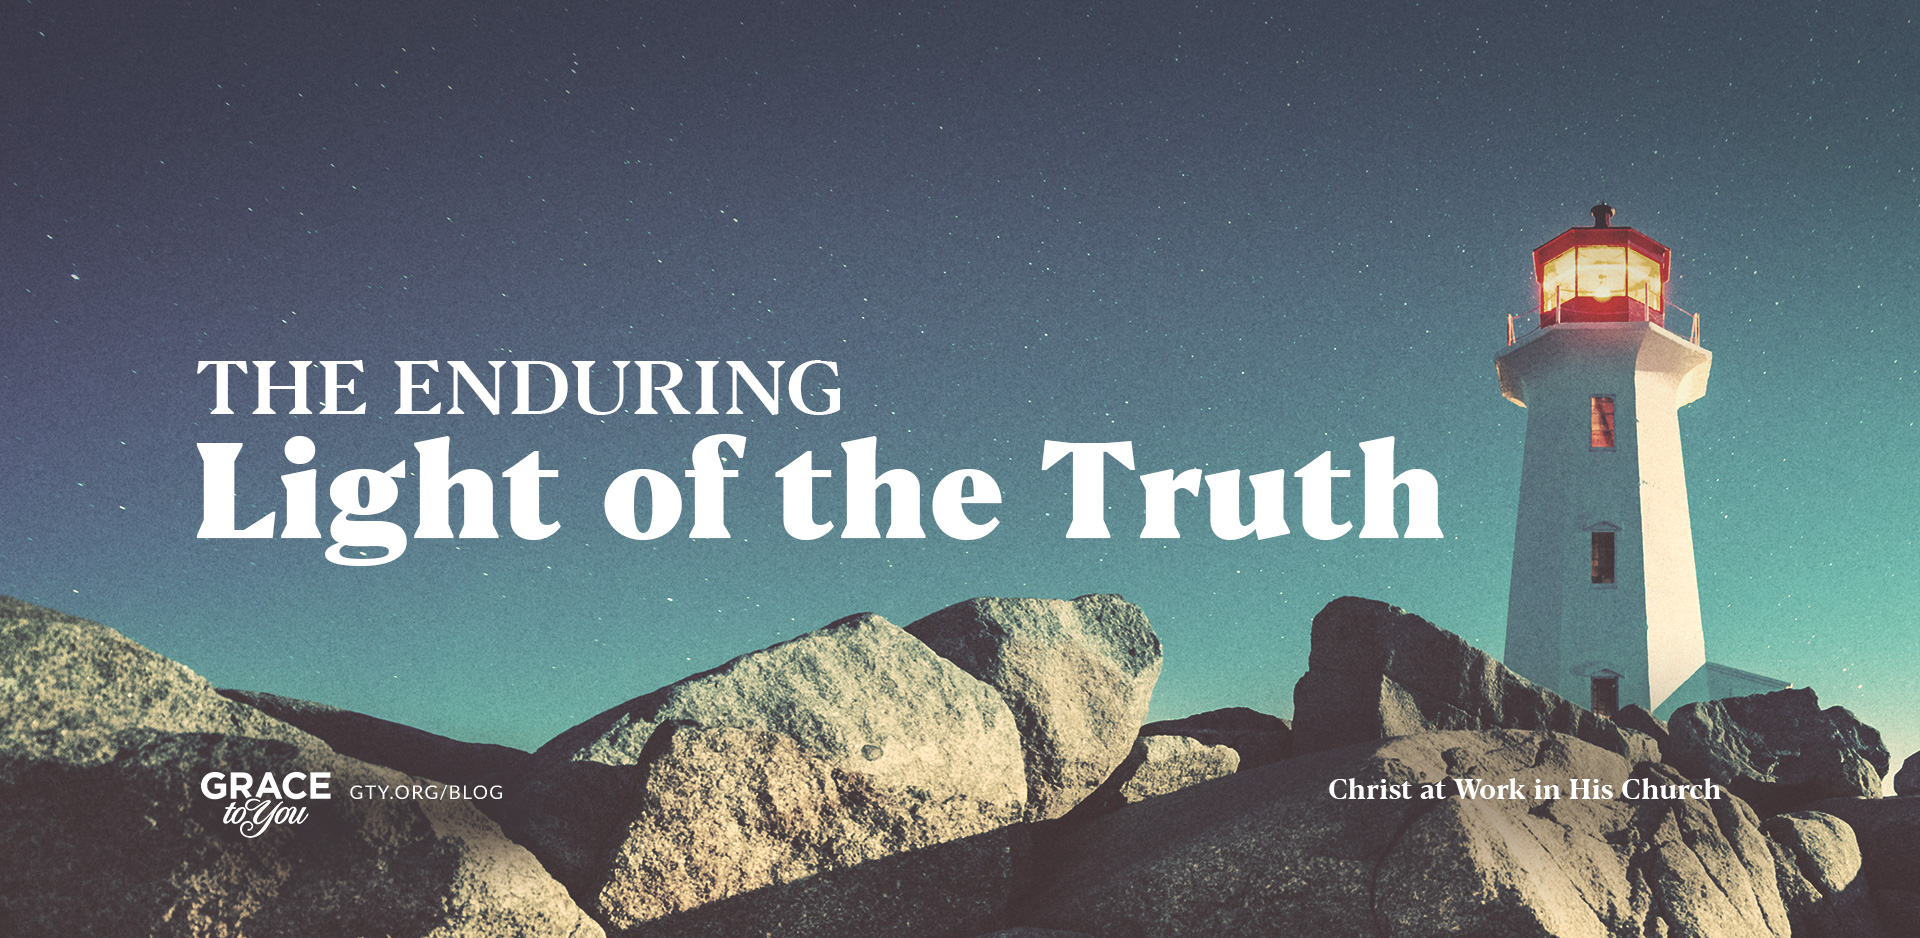 The Enduring Light of the Truth